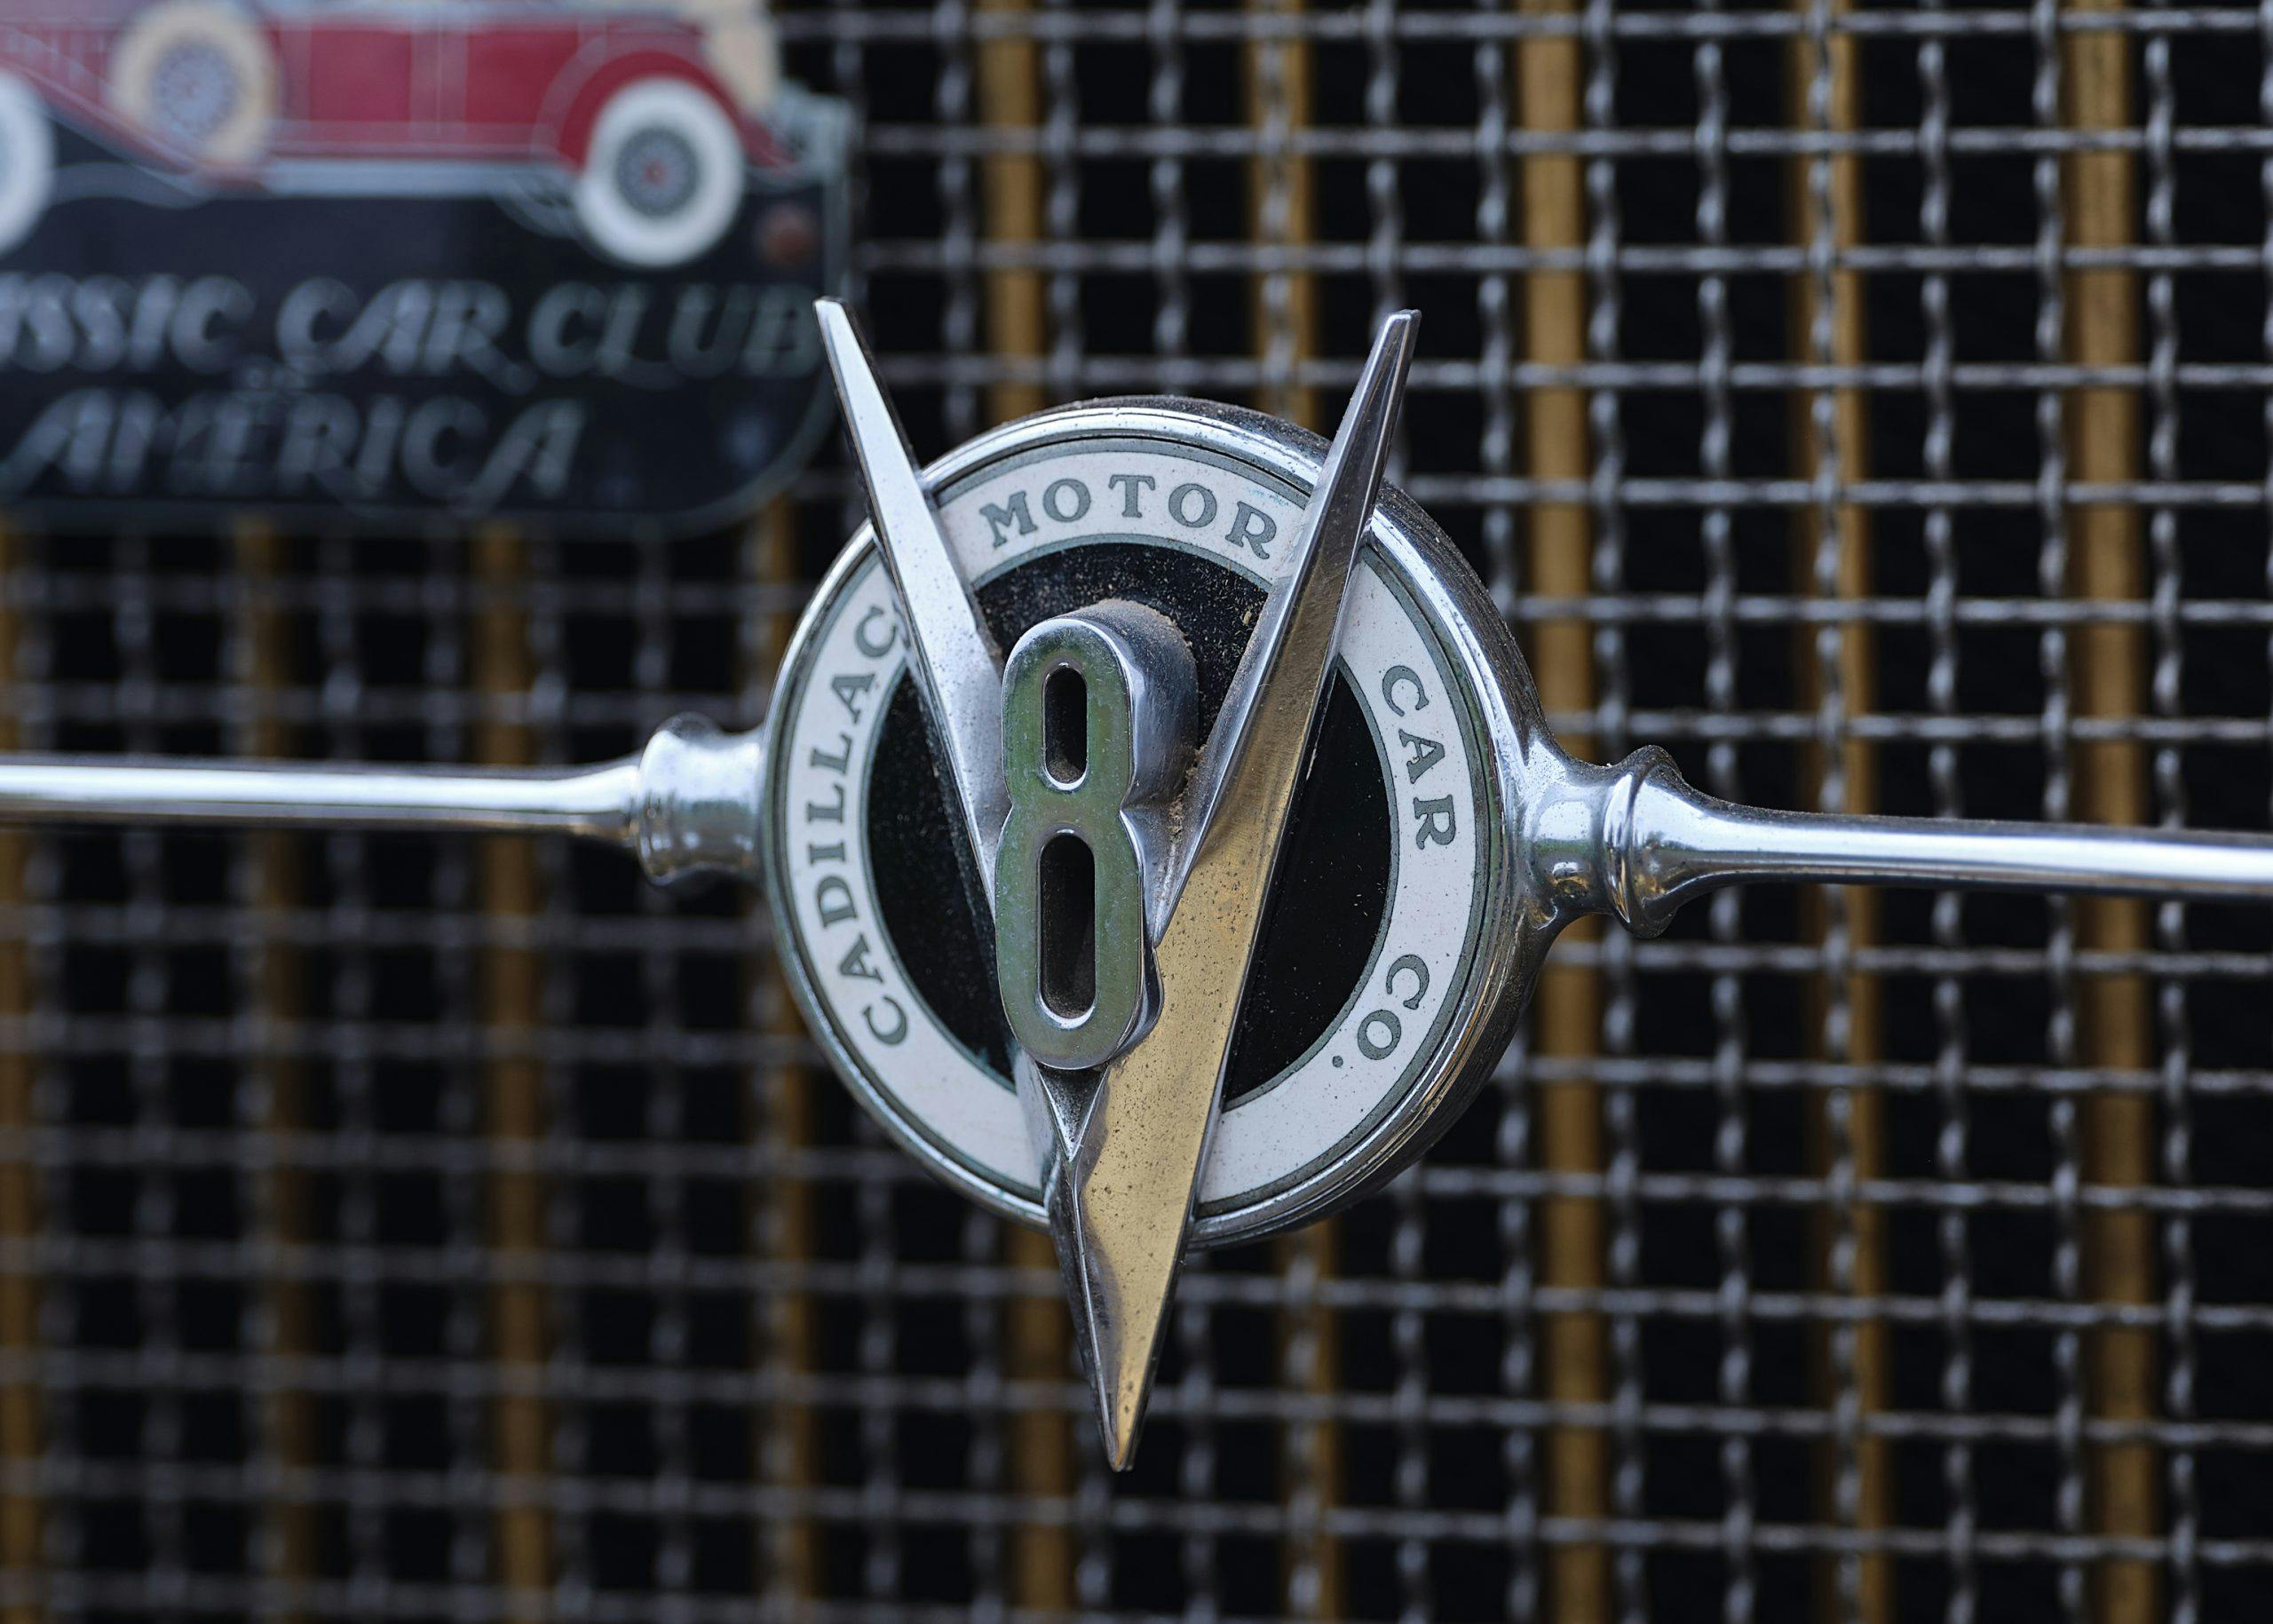 1931 Cadillac V-8 Convertible Coupe front grille emblem badge